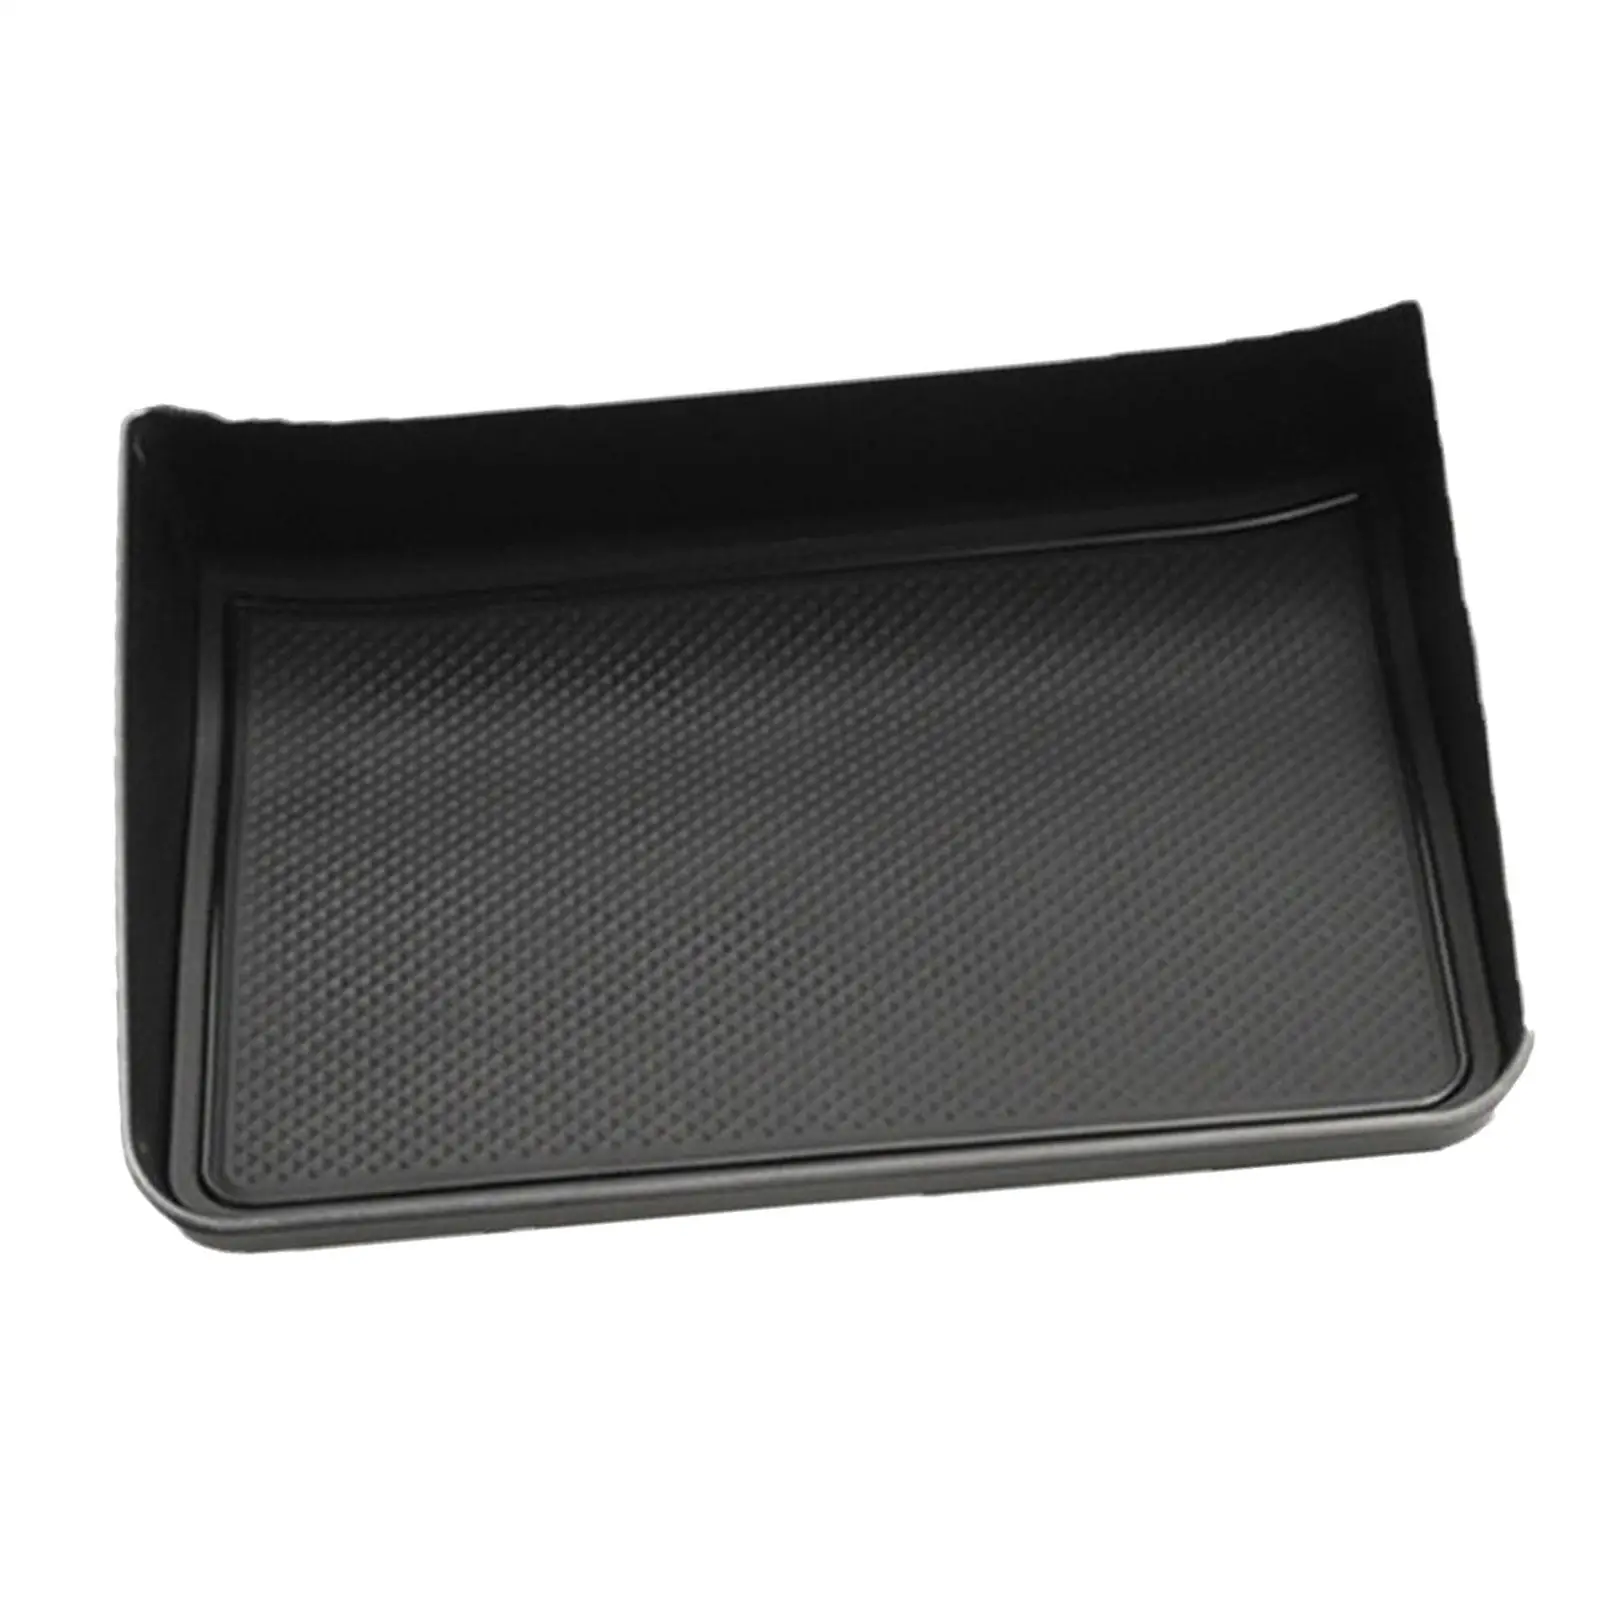 Car Tissue Holder Direct Replaces Dashboard Organizer for Toyota bz3